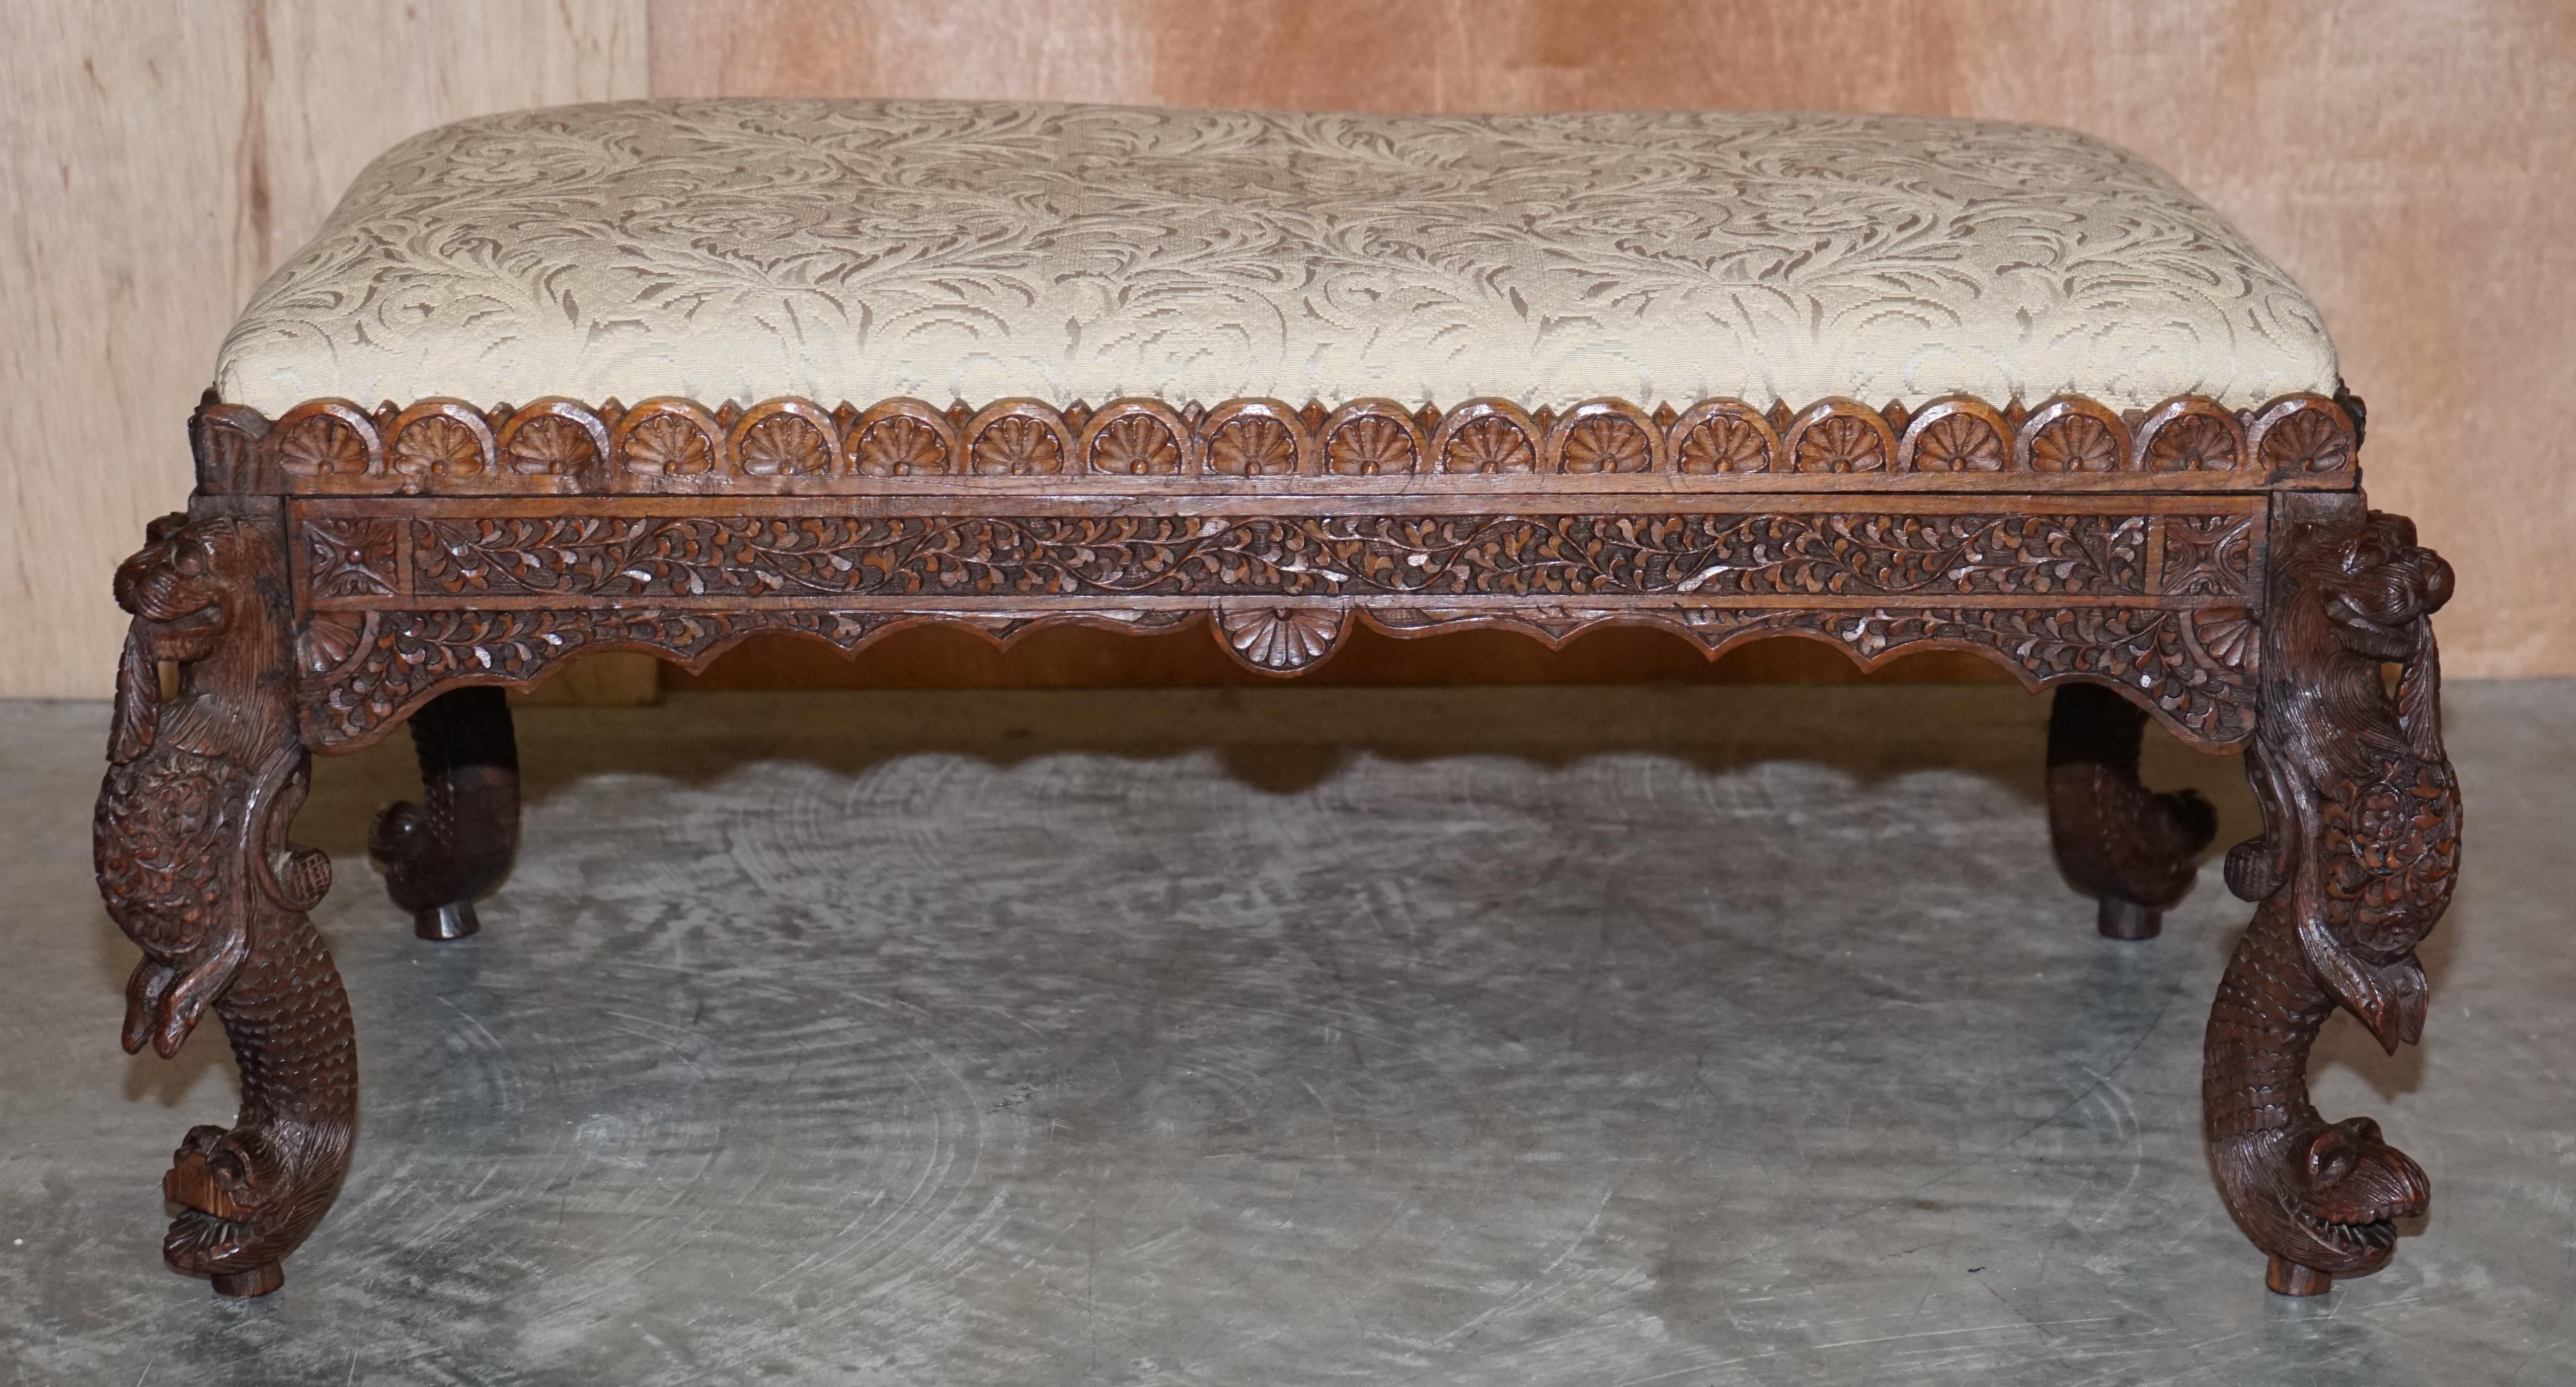 Fine circa 1880 Antique Victorian Anglo Indian Burmese Carved Footstool Ottoman For Sale 1